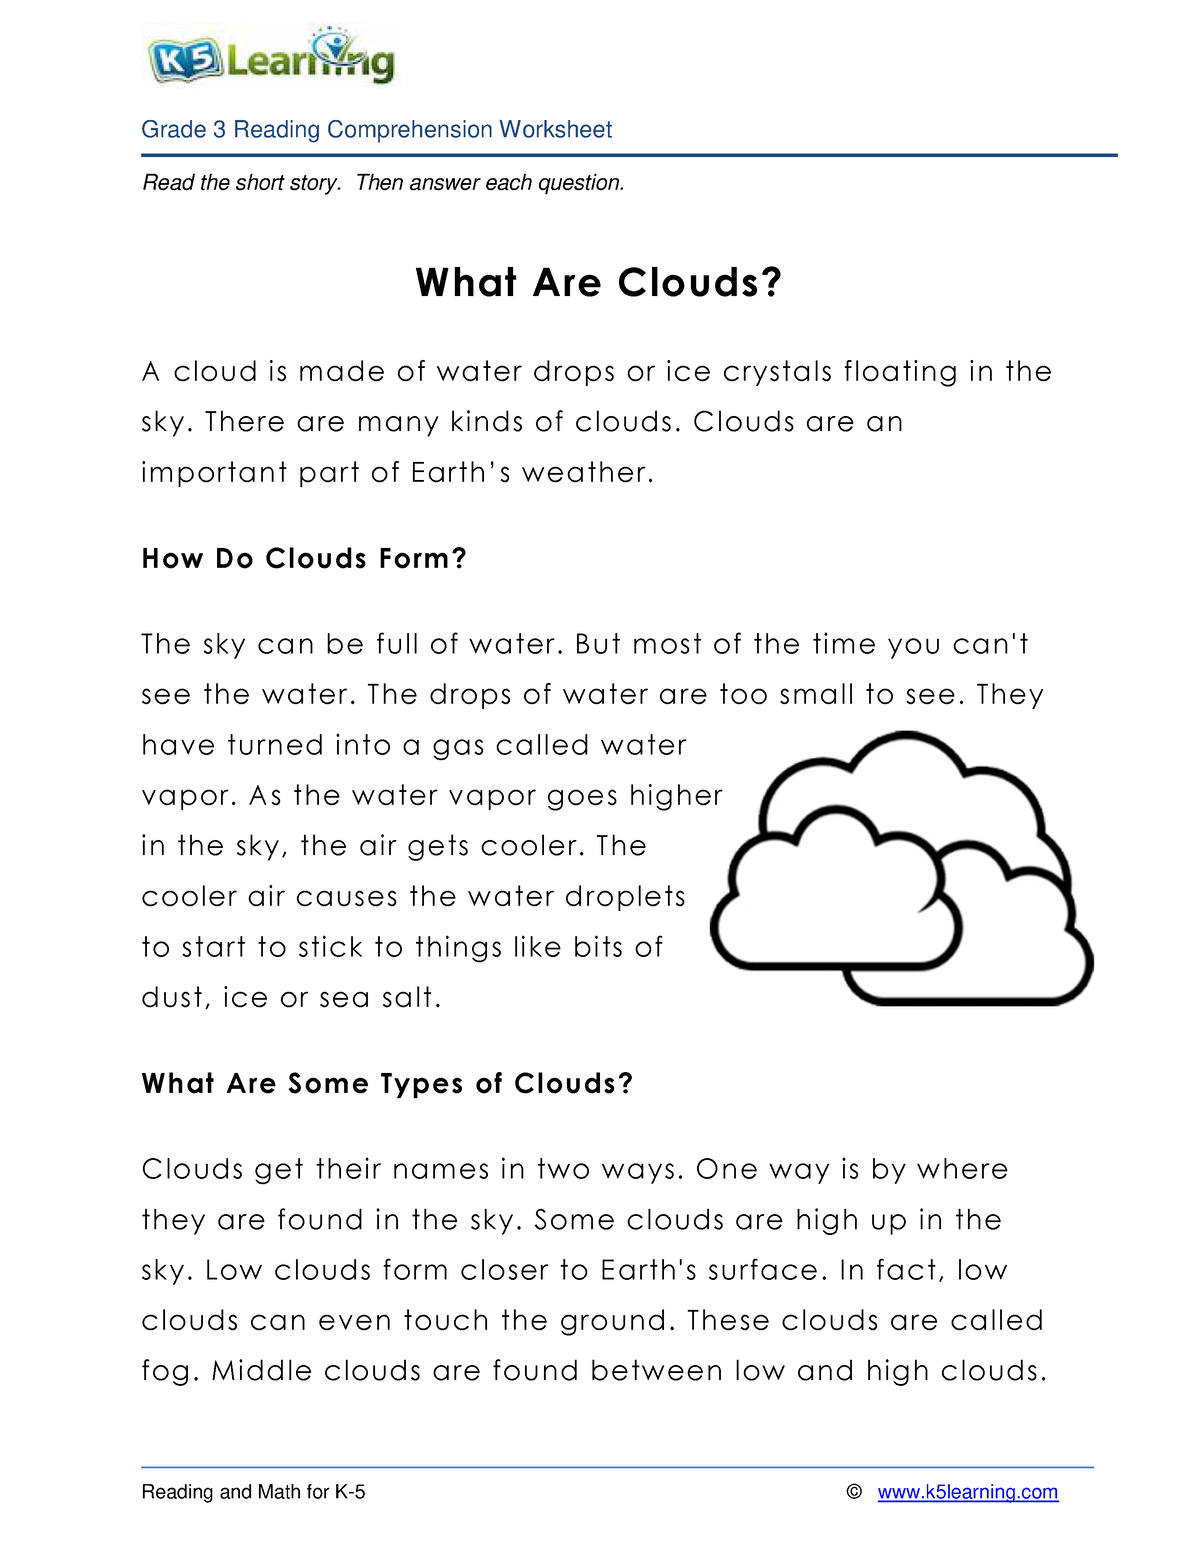 3rd grade 3 reading what are clouds - Read the short story. Then answer ...